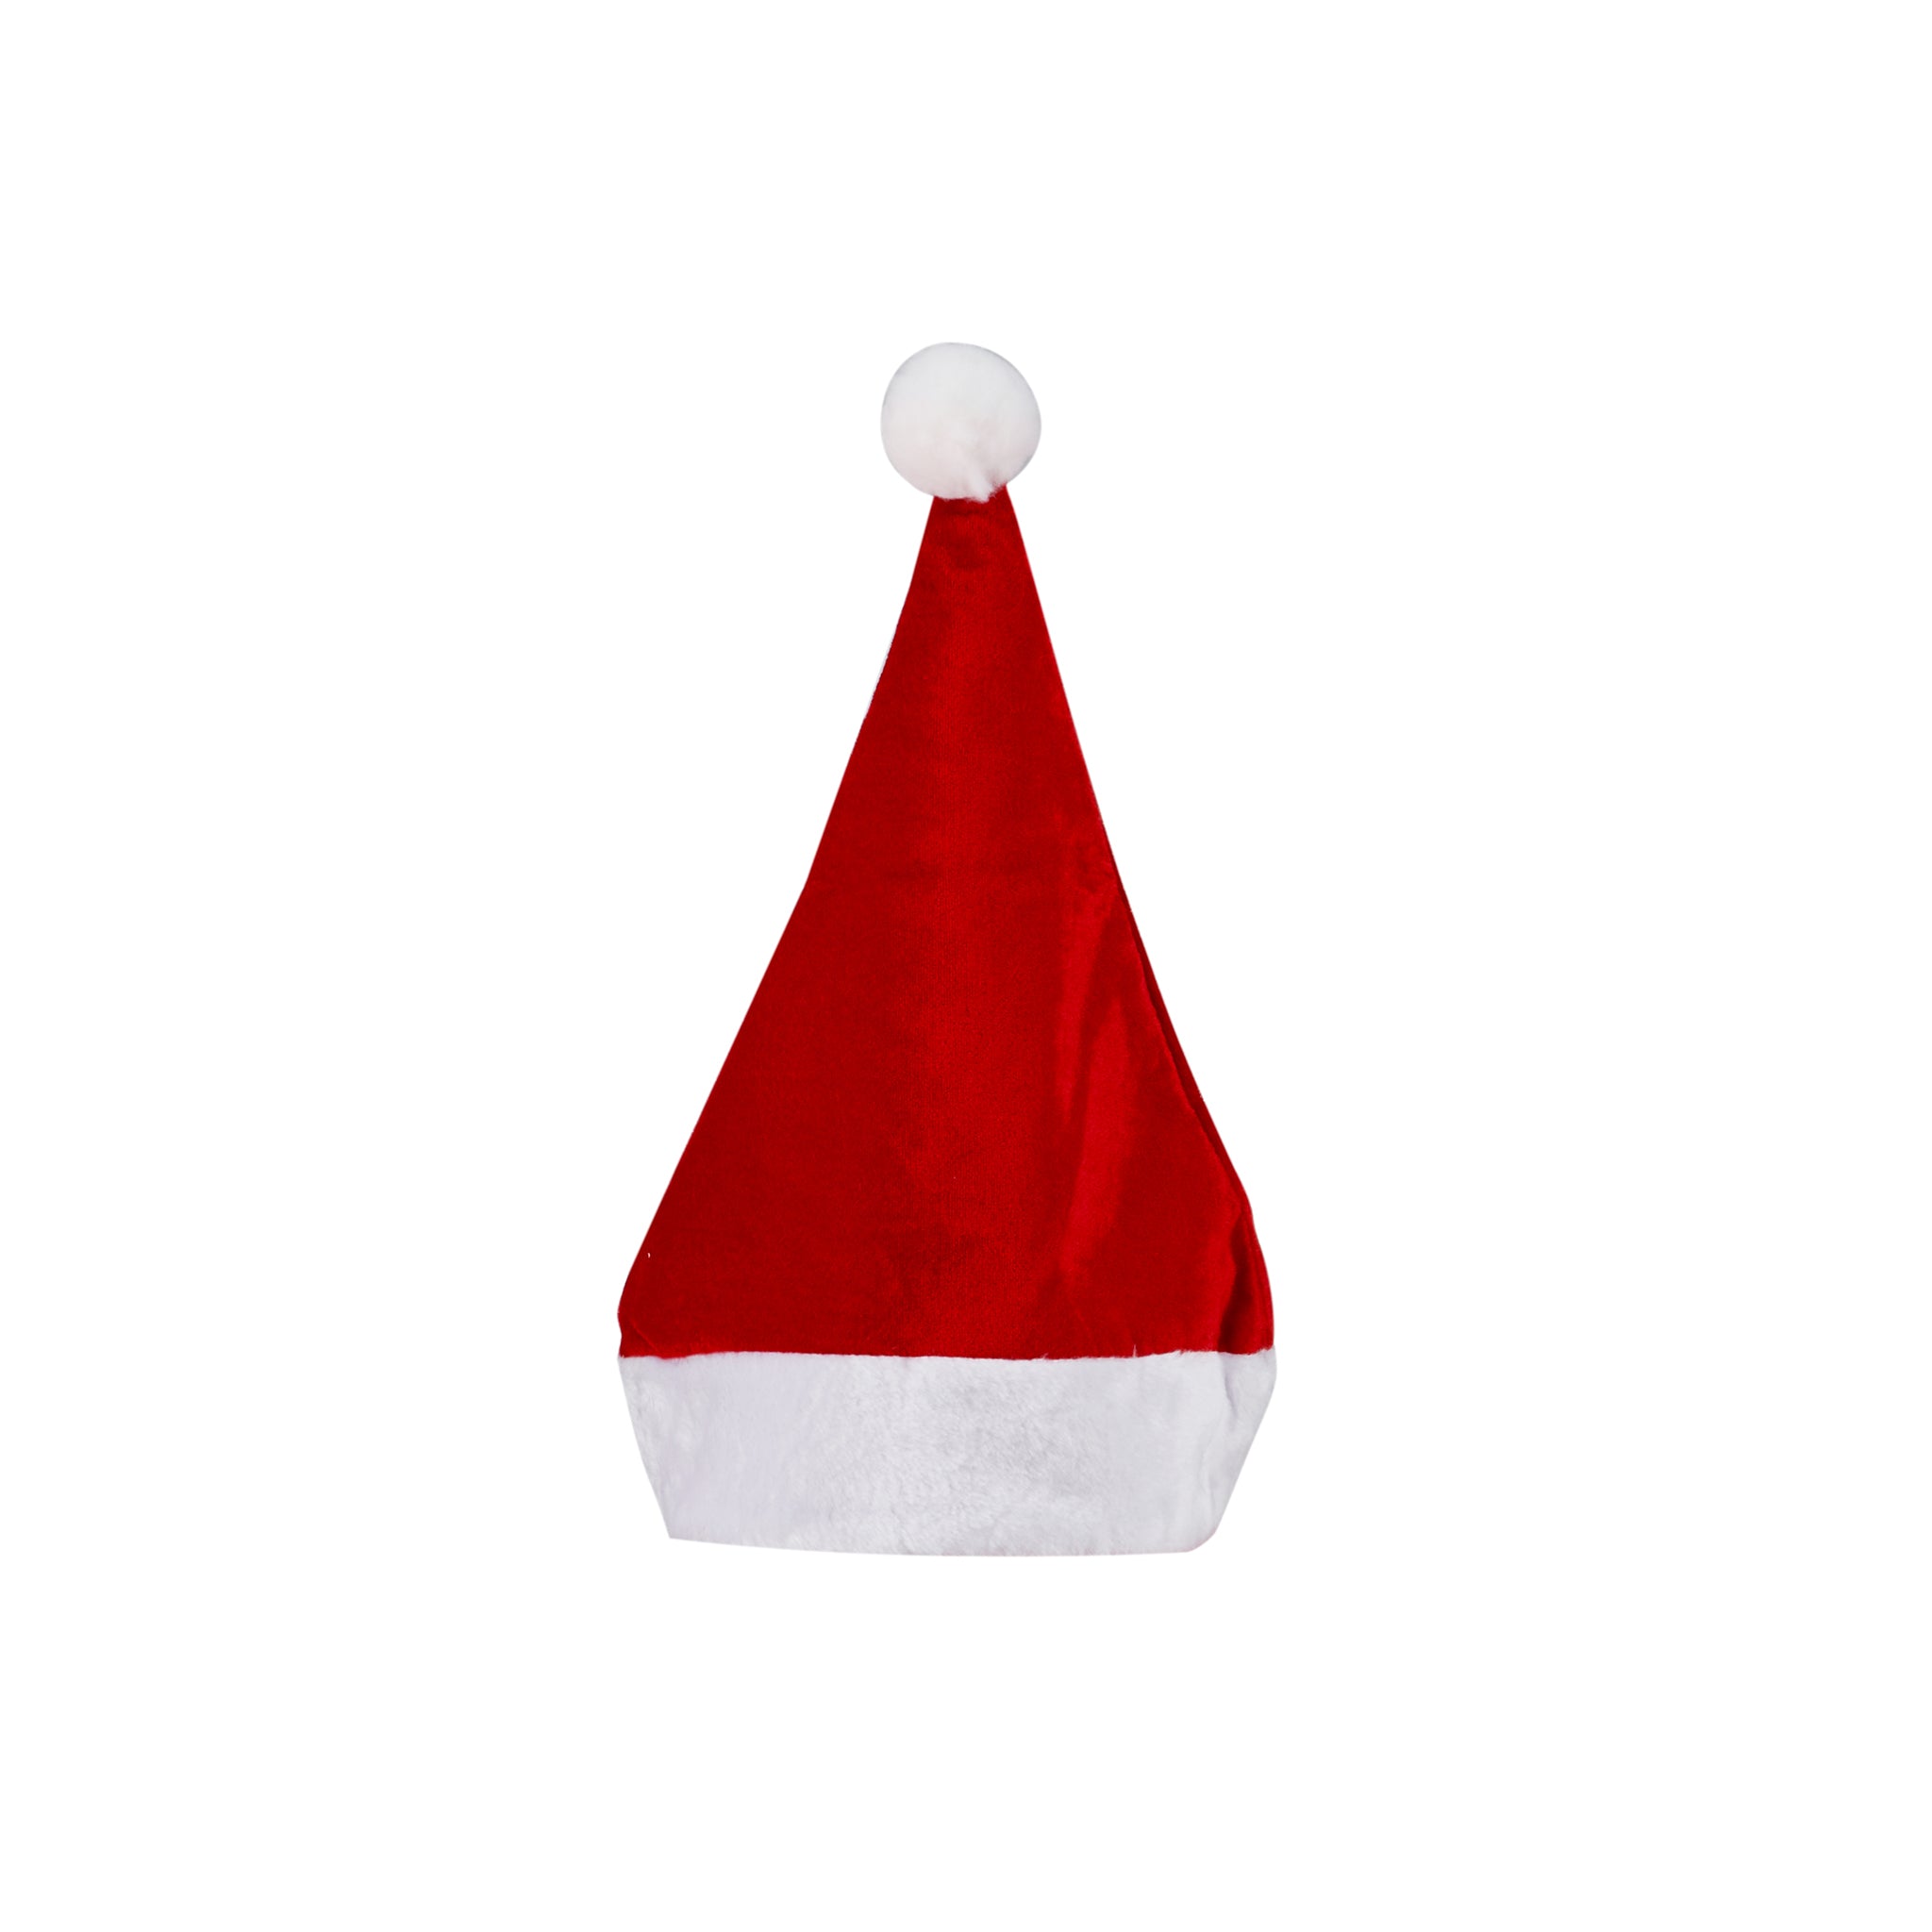 Christmas Hat for Adults 37 x 30 cm 1 Piece - hotpackwebstore.com